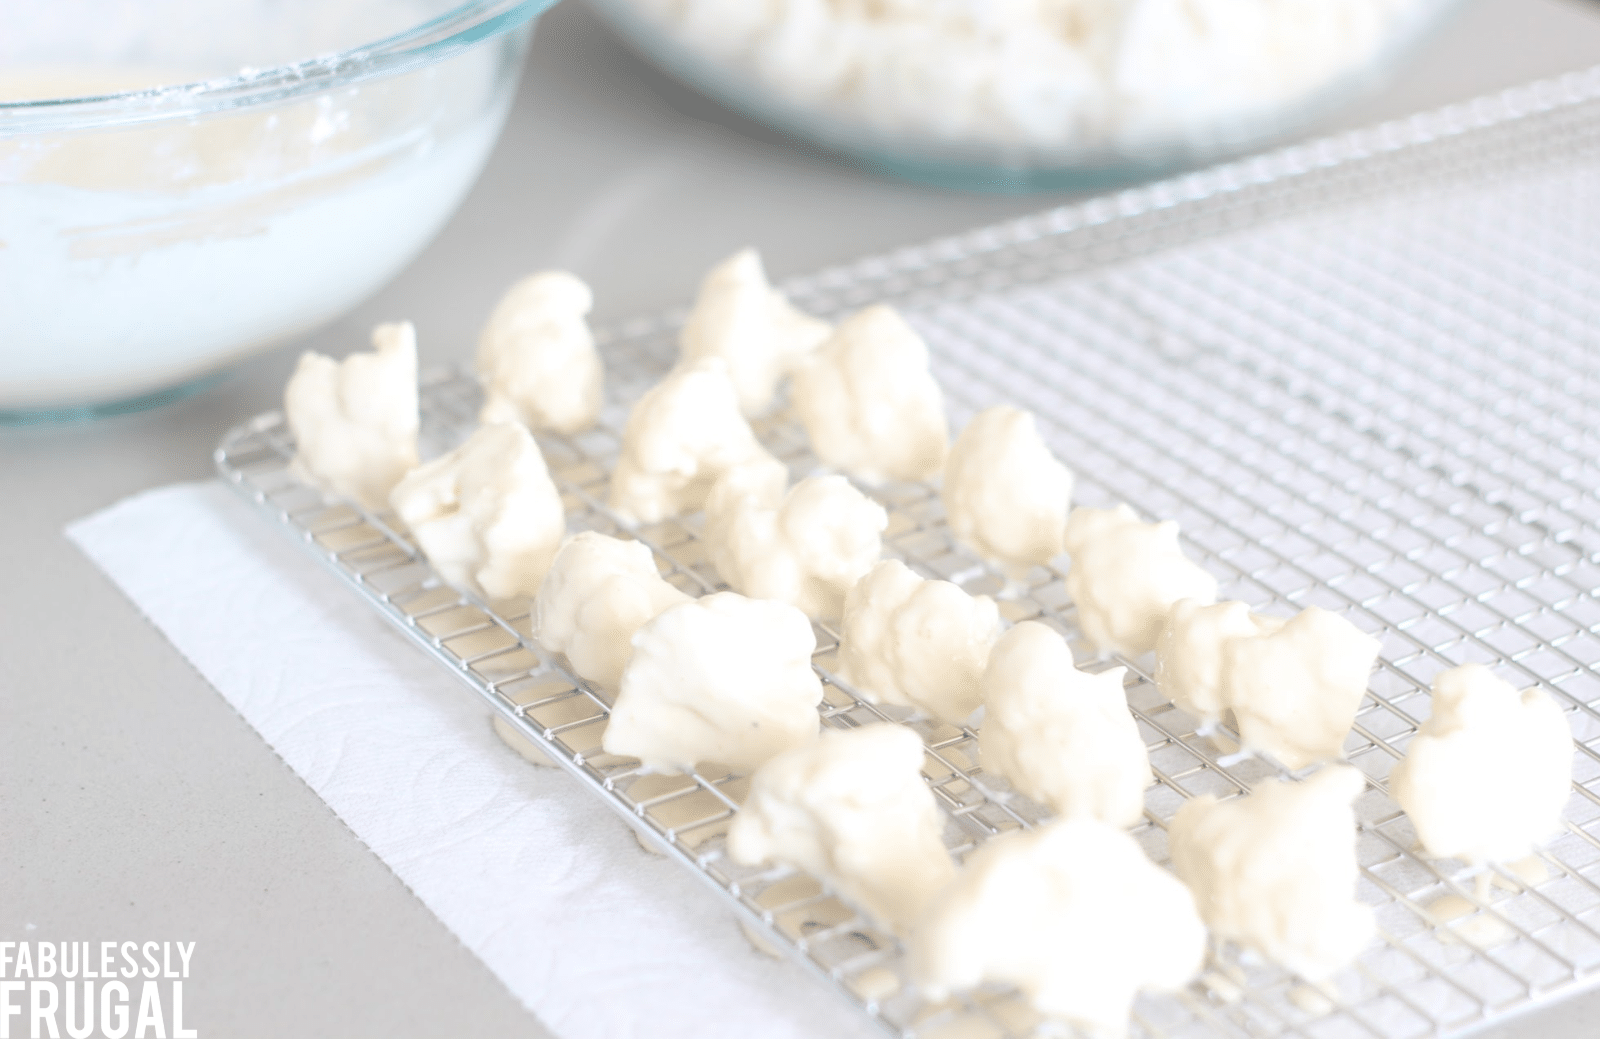 Removing excess batter from cauliflower using wire cooling rack